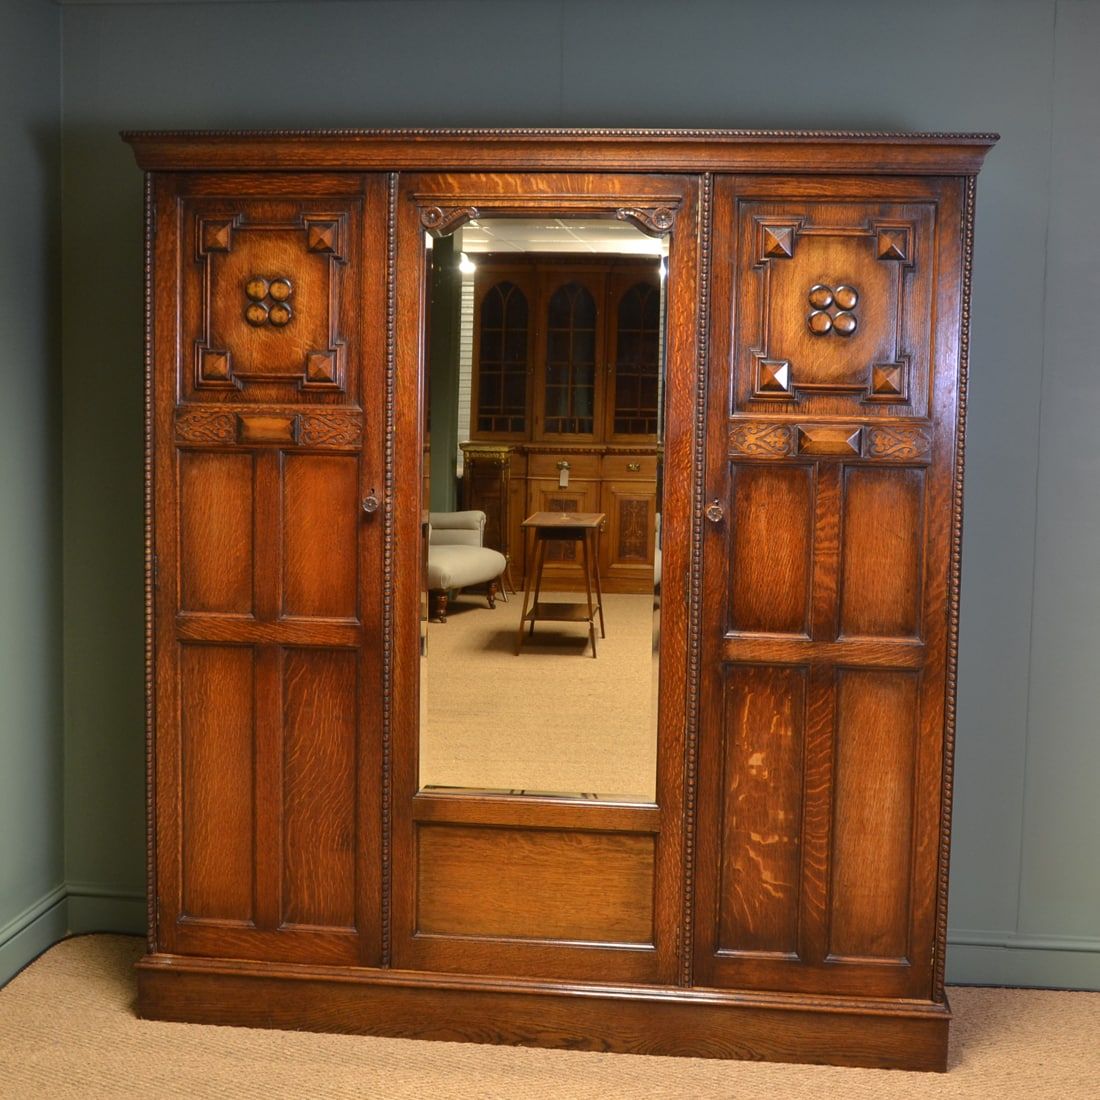 Antique Wardrobes For Sale – Victorian, Georgian & Edwardian With Regard To Victorian Wardrobes For Sale (View 6 of 15)